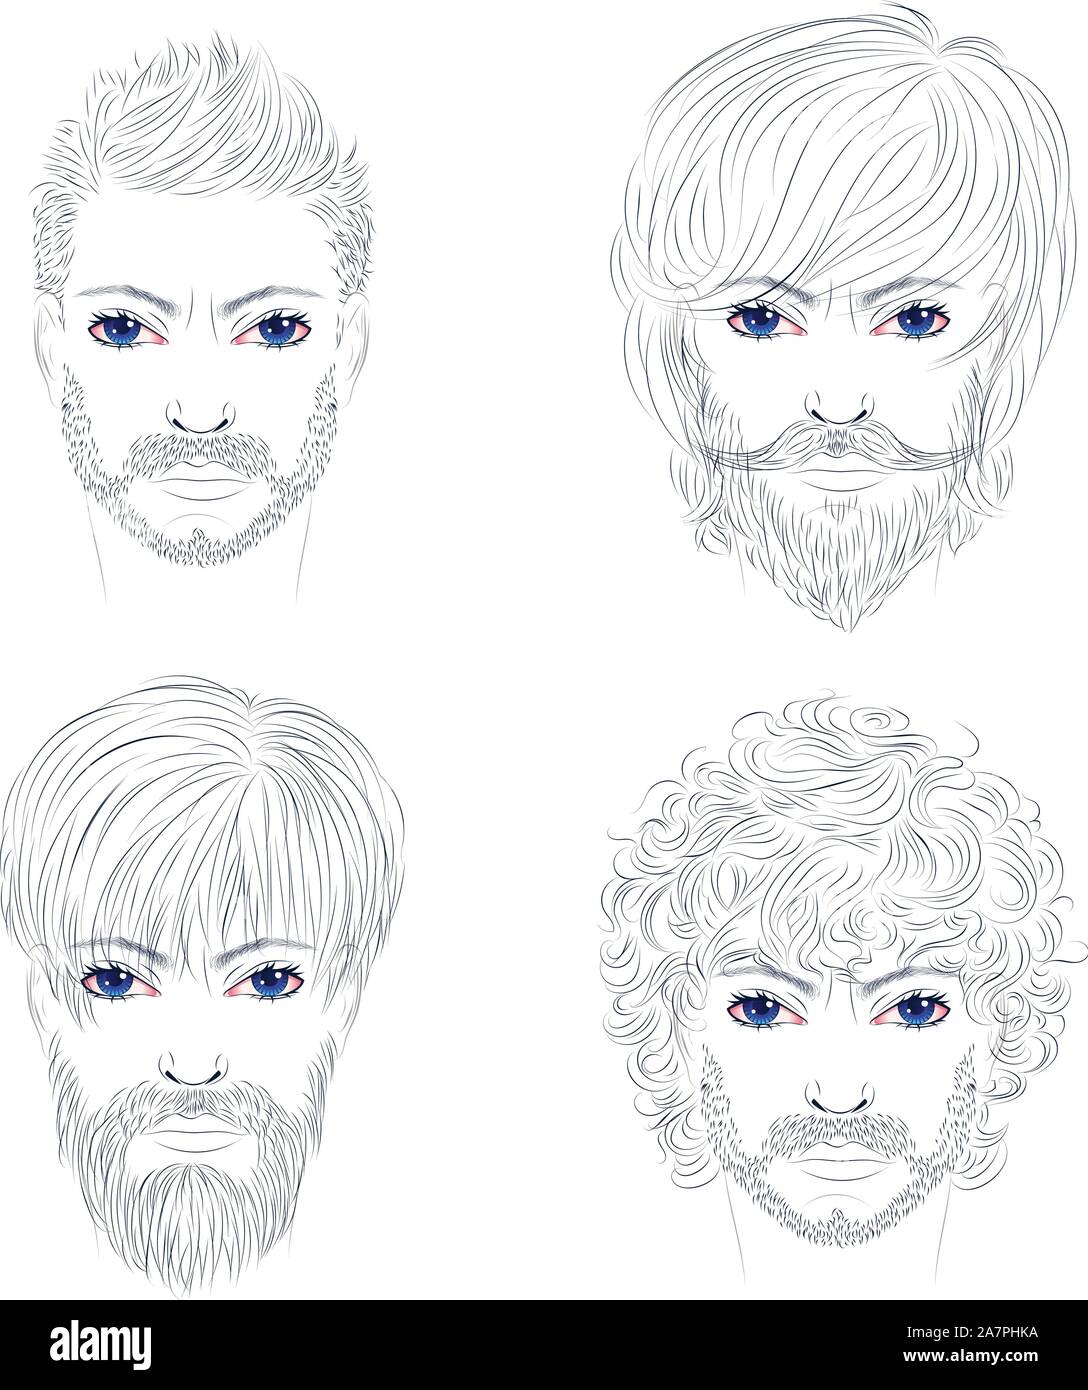 Stylized Portrait Of A Man With Different Hairstyles Beards